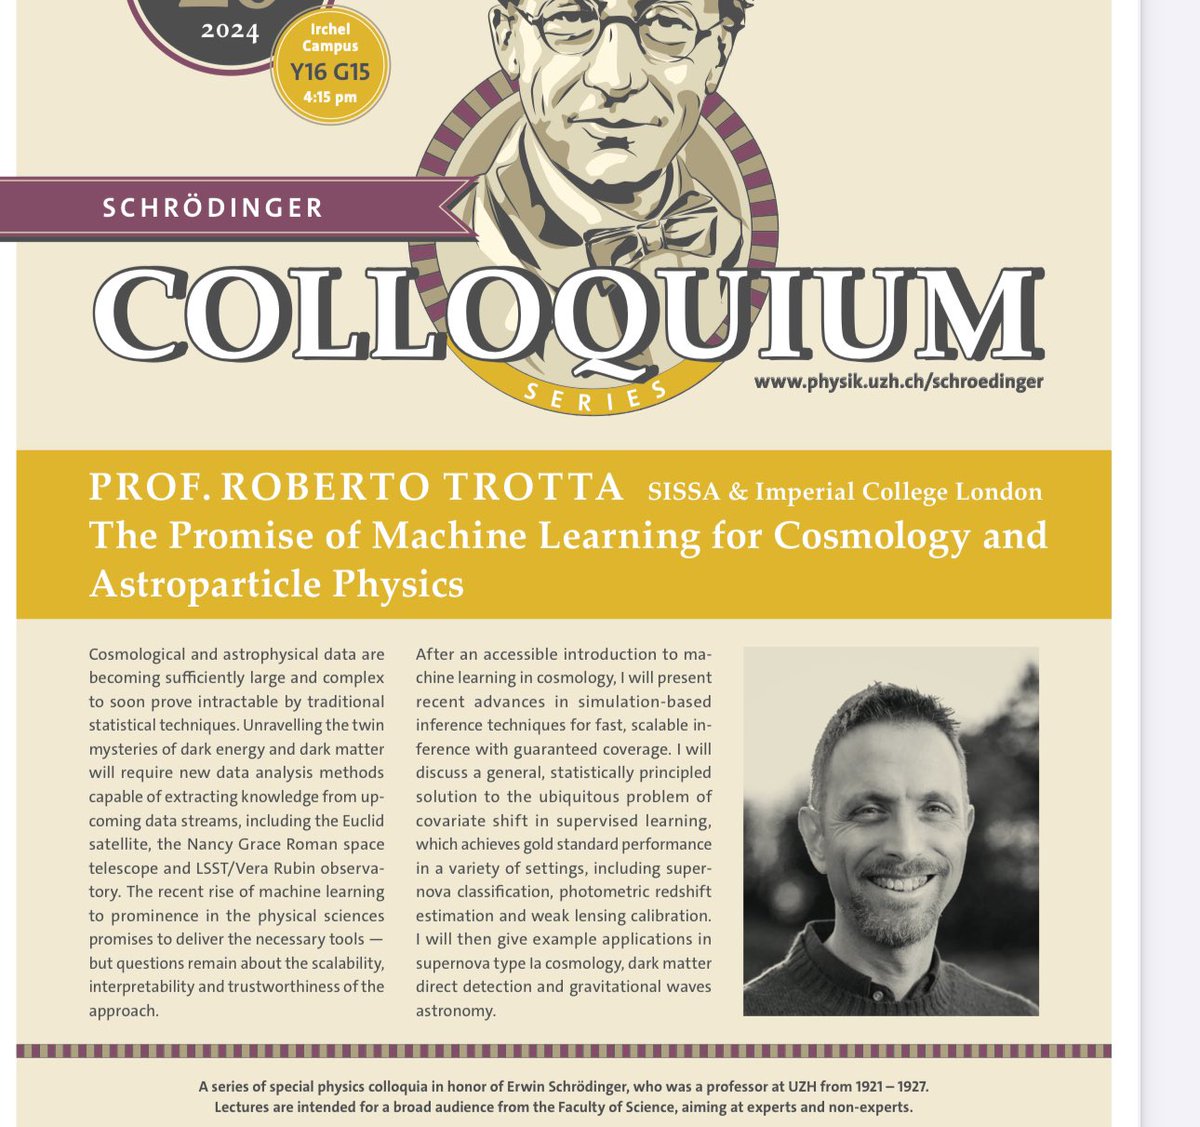 If you’re in Zurich, join us today for Prof. Roberto Trotta’s (@R_Trotta) talk on “The Promise of Machine Learning for Cosmology and Astroparticle Physics”! @UZHPhysics @UZH_Science  physik.uzh.ch/en/seminars/sc…